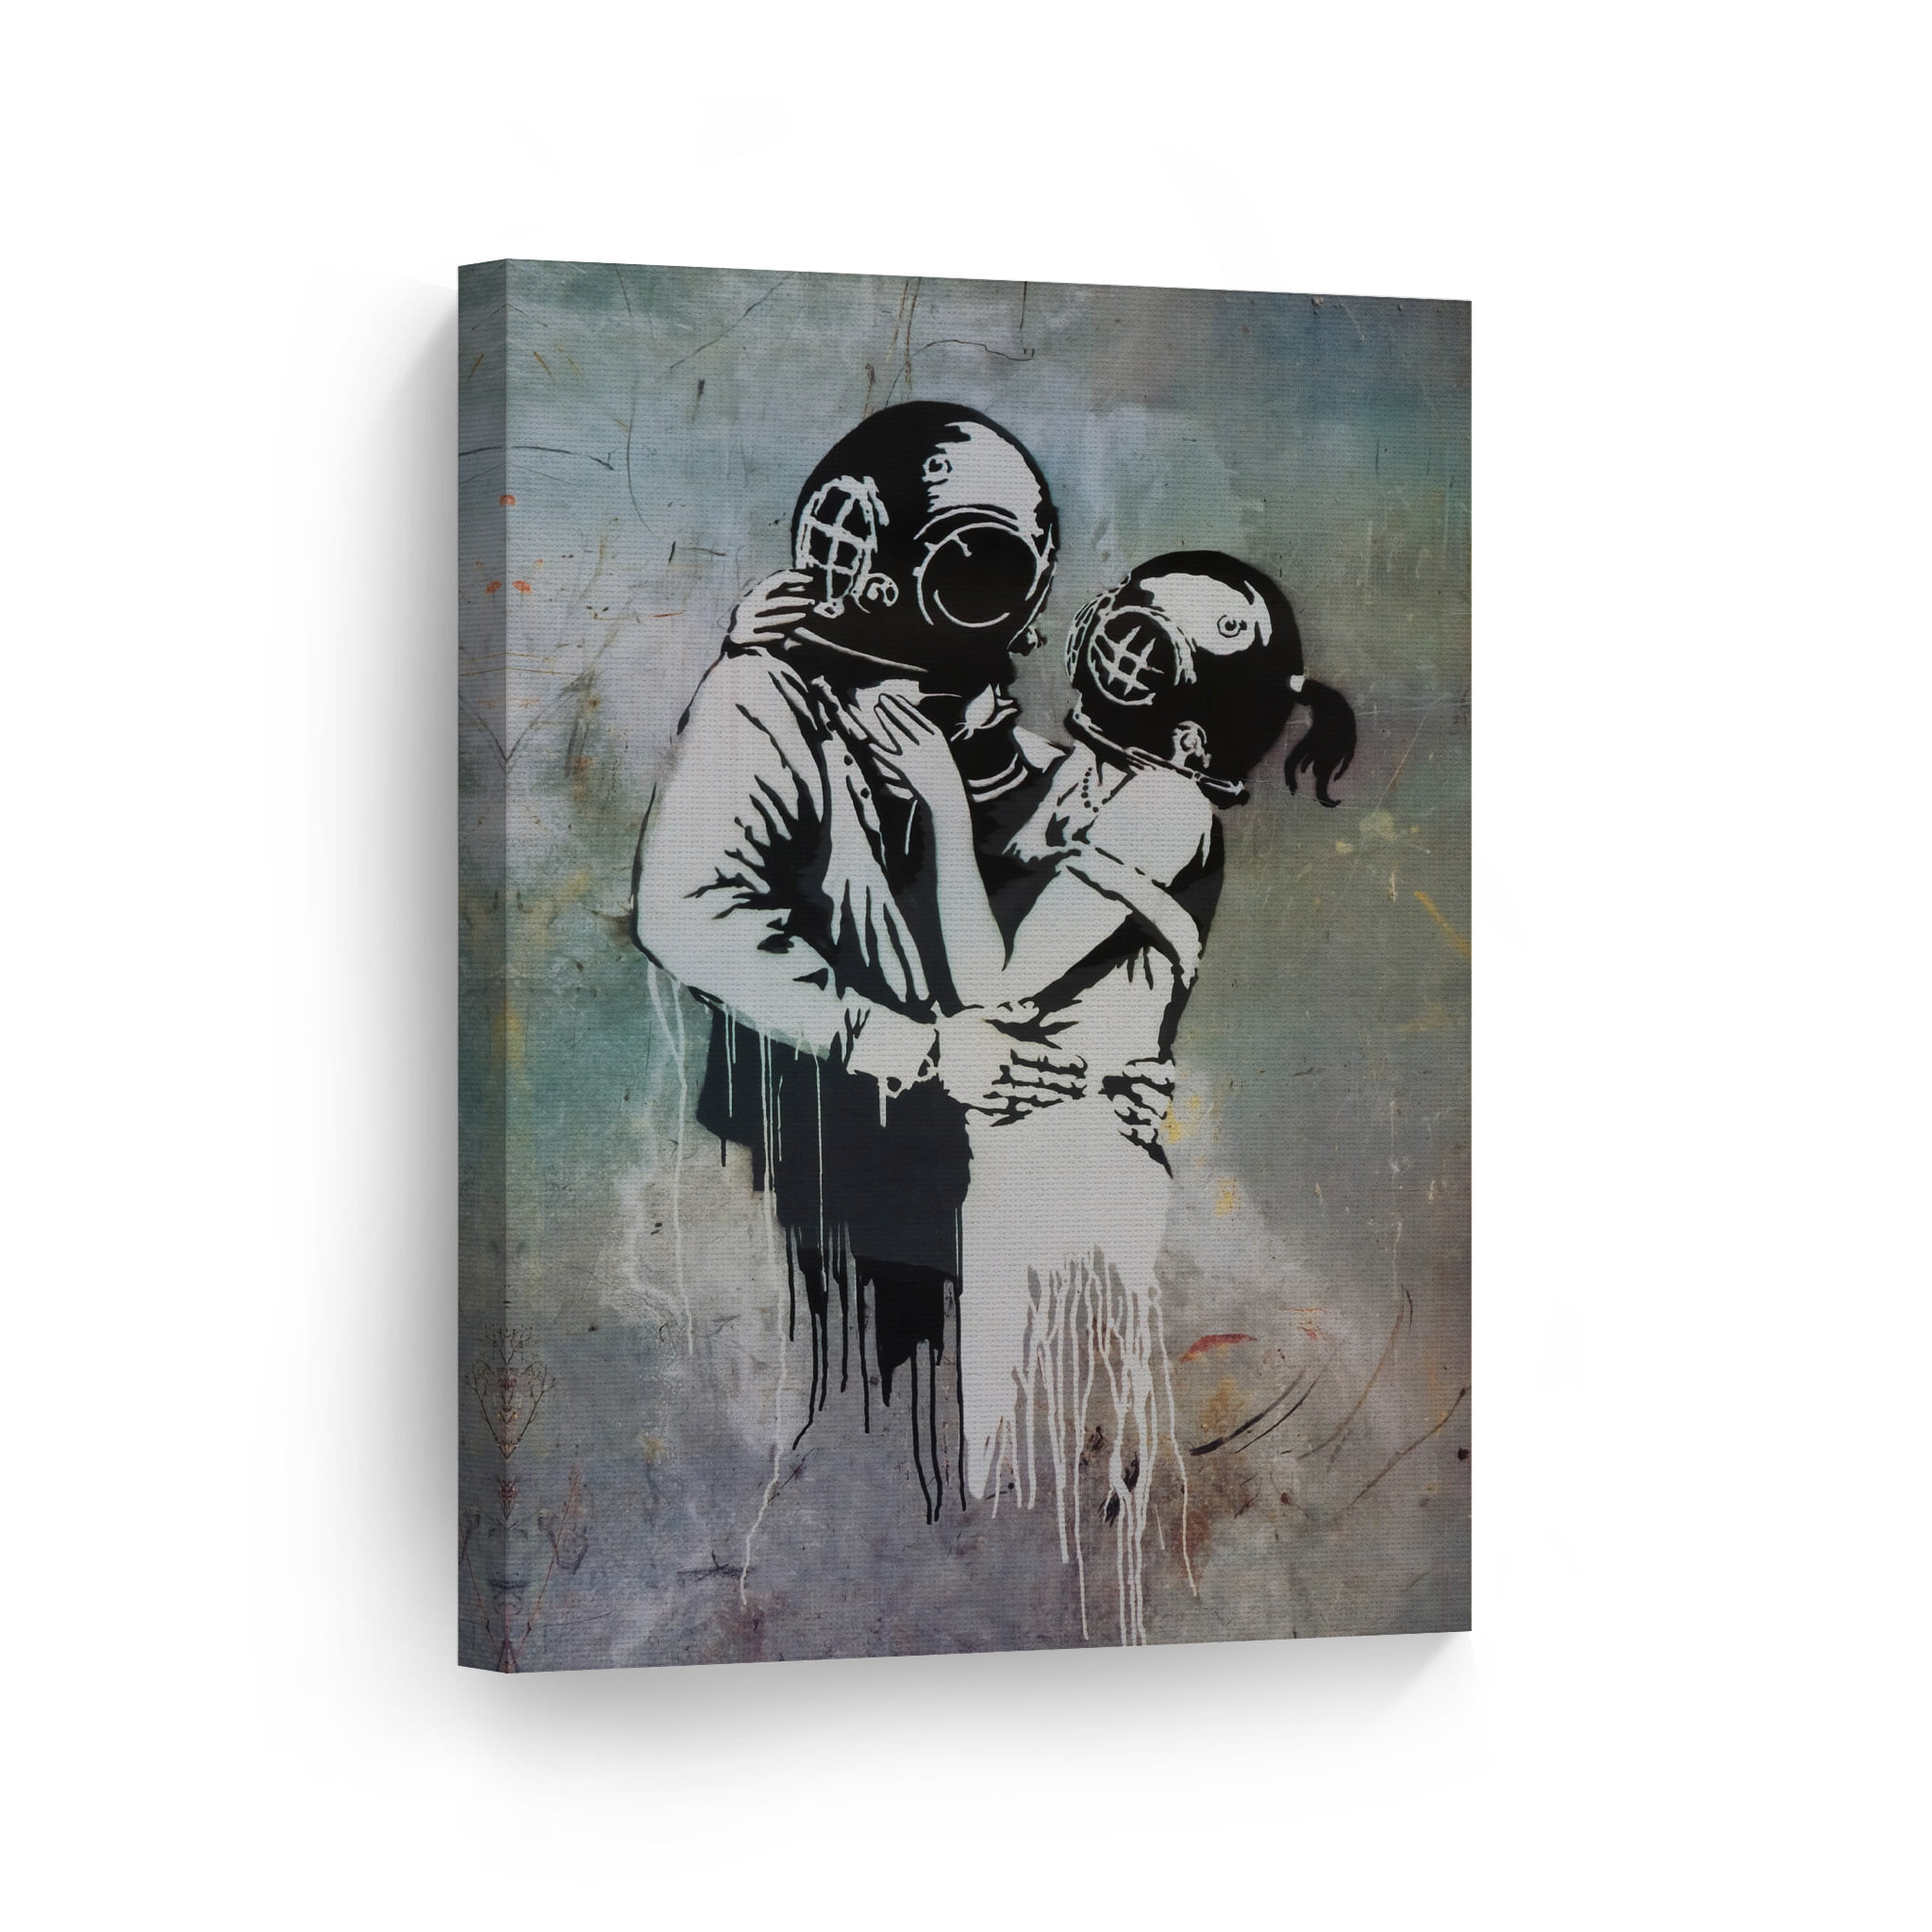 Banksy Art Canvas Prints Einstein Street Art Wall Painting Picture Home Decor